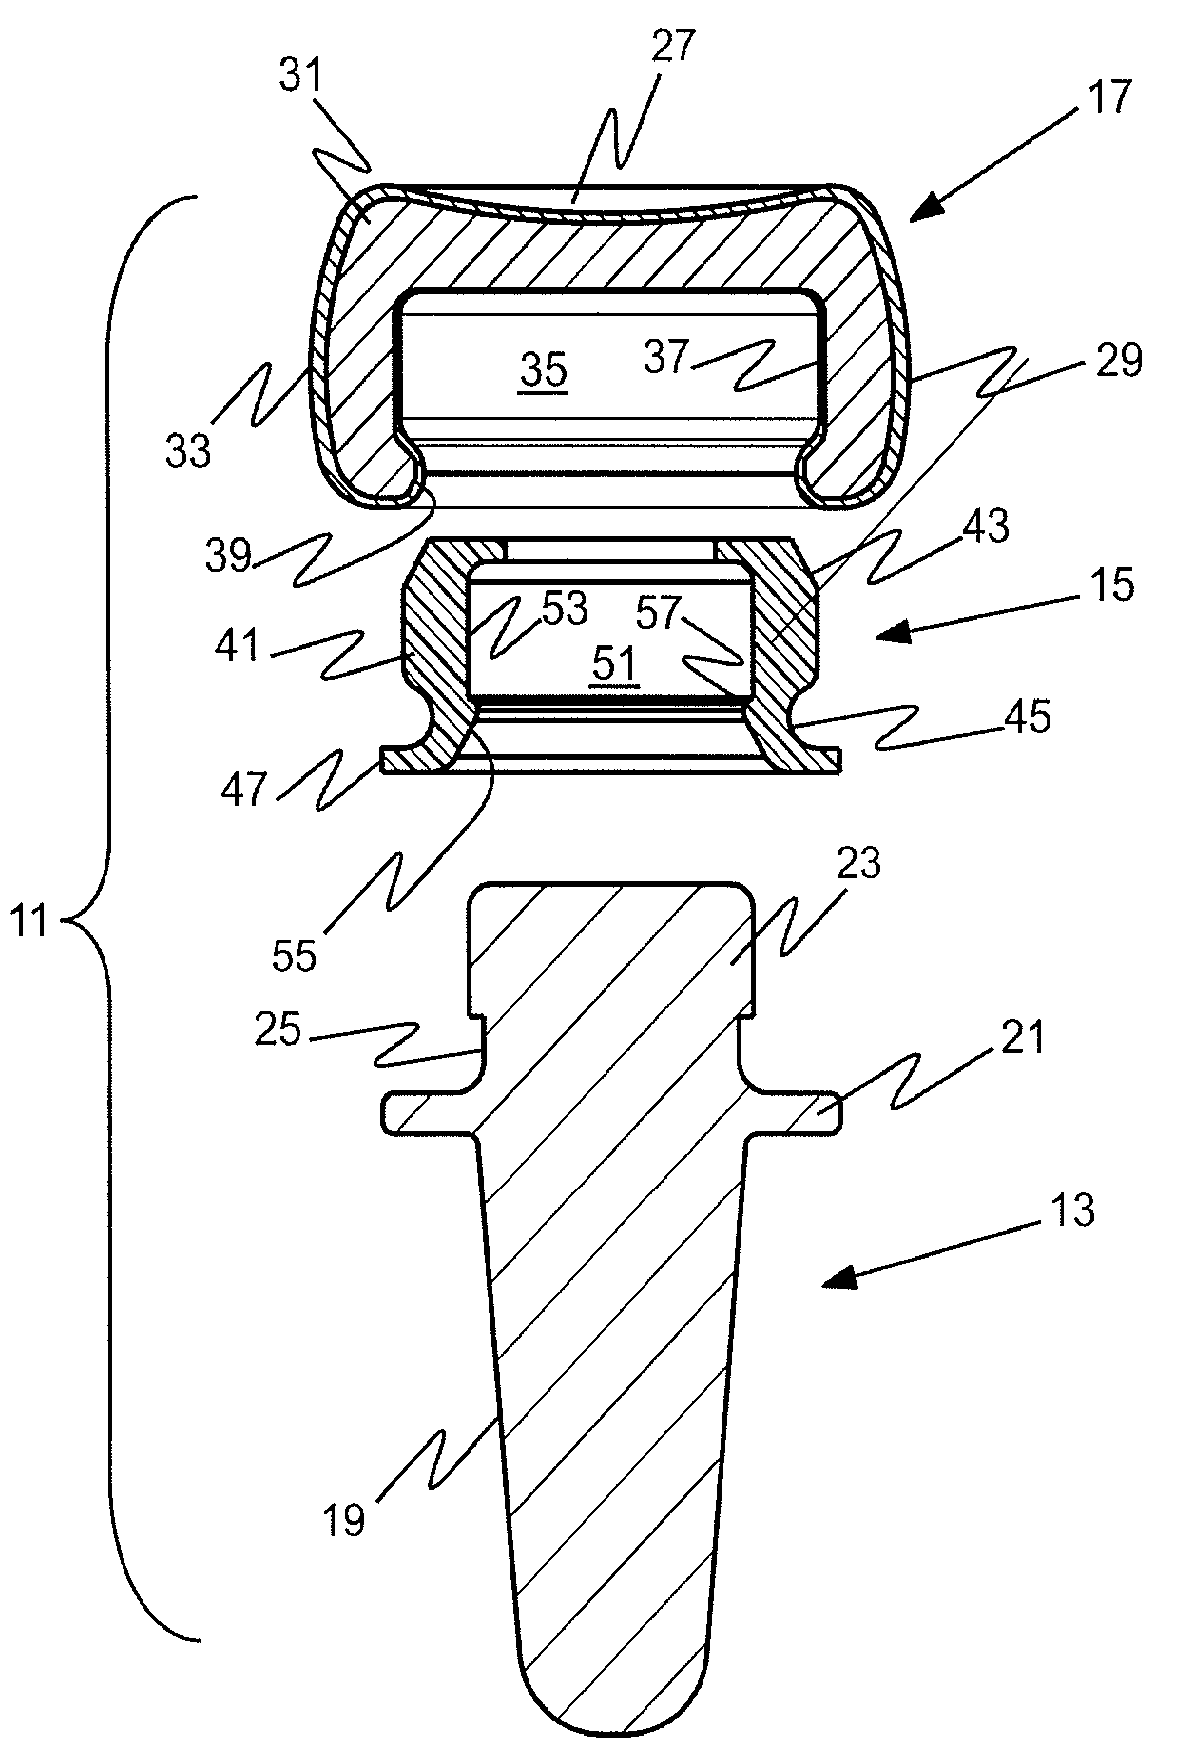 Prosthetic implant and assembly method